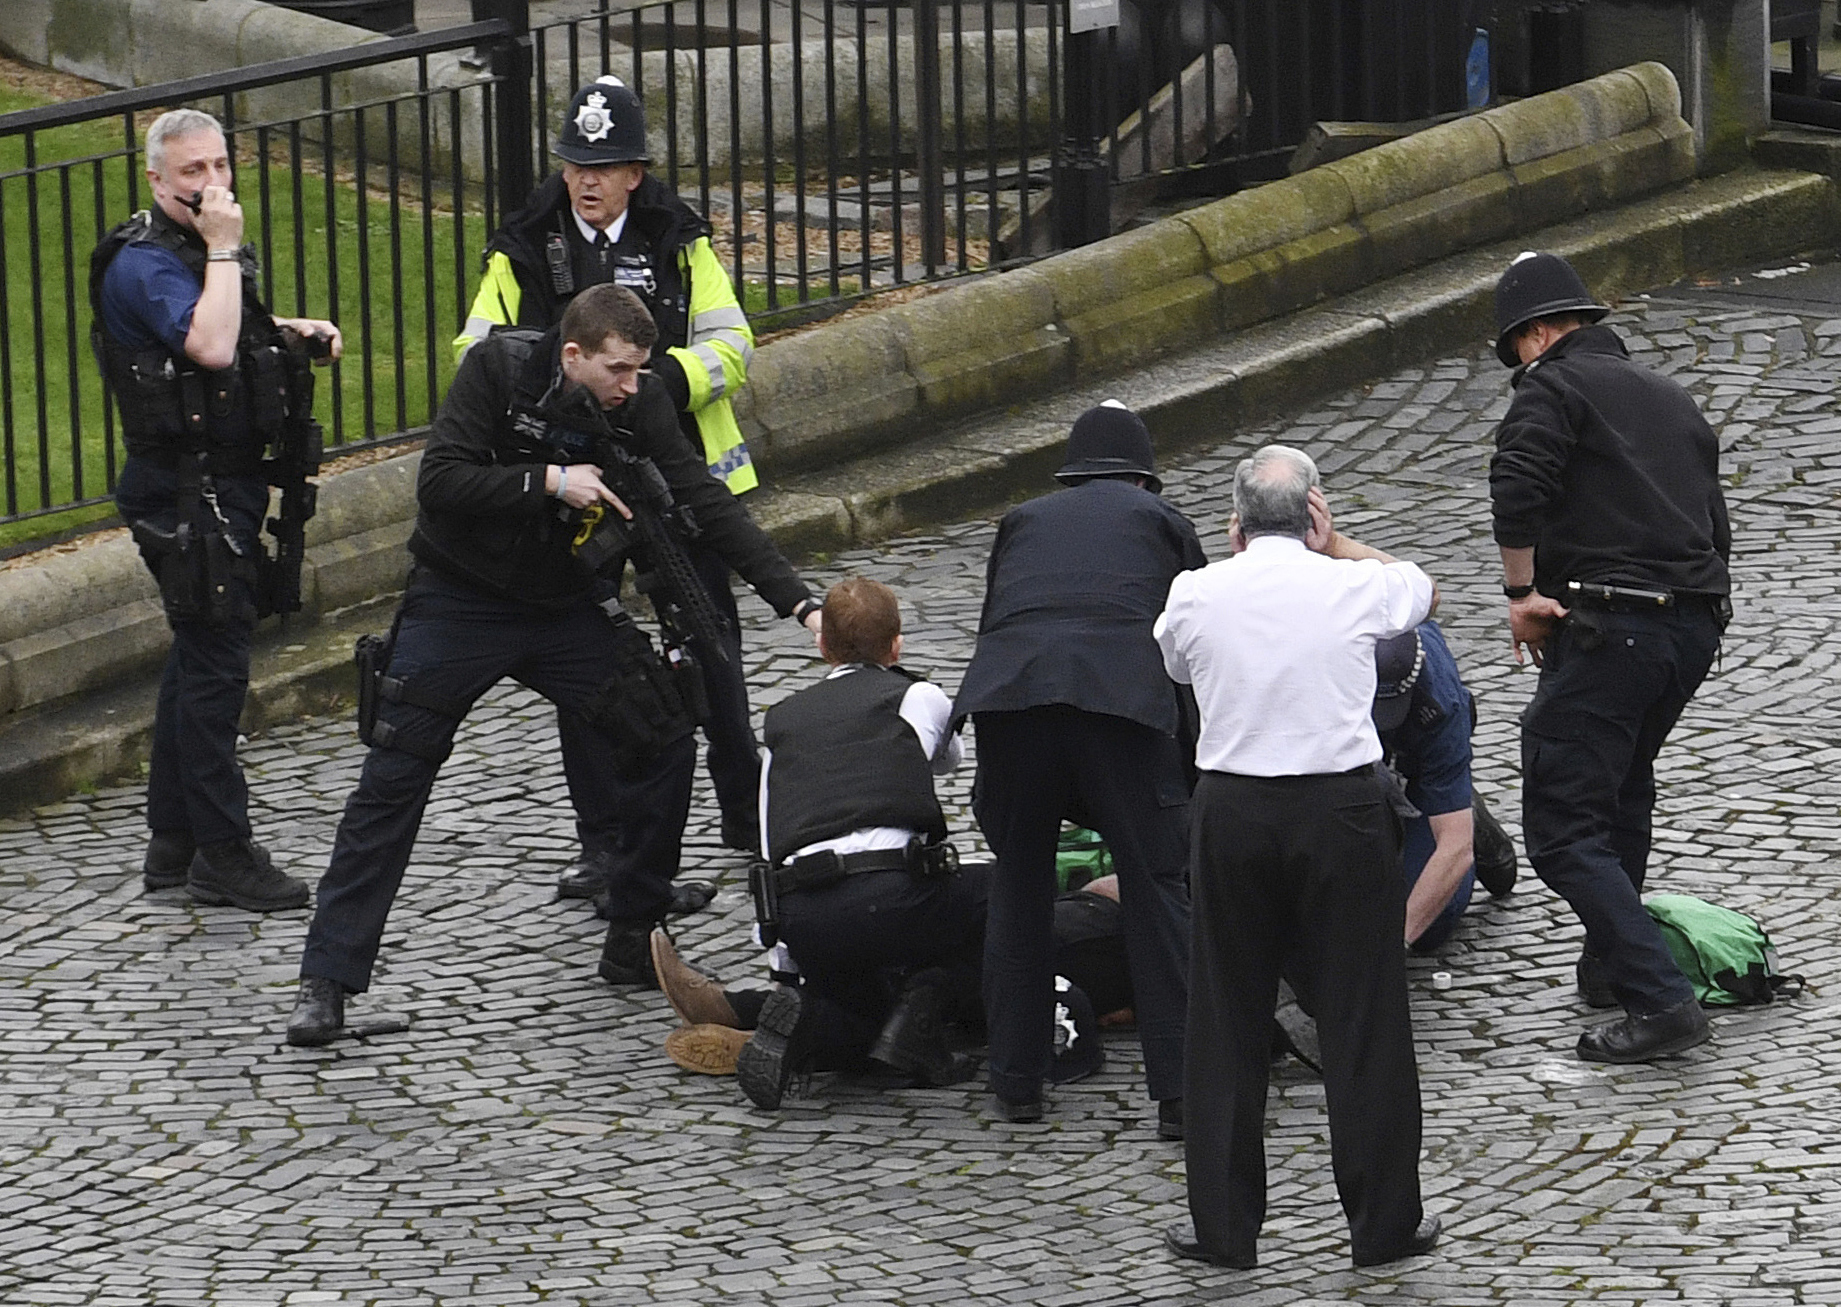 PHOTO: A policeman points a gun at a man on the ground as emergency services attend the scene outside the Palace of Westminster, London, March 22, 2017.